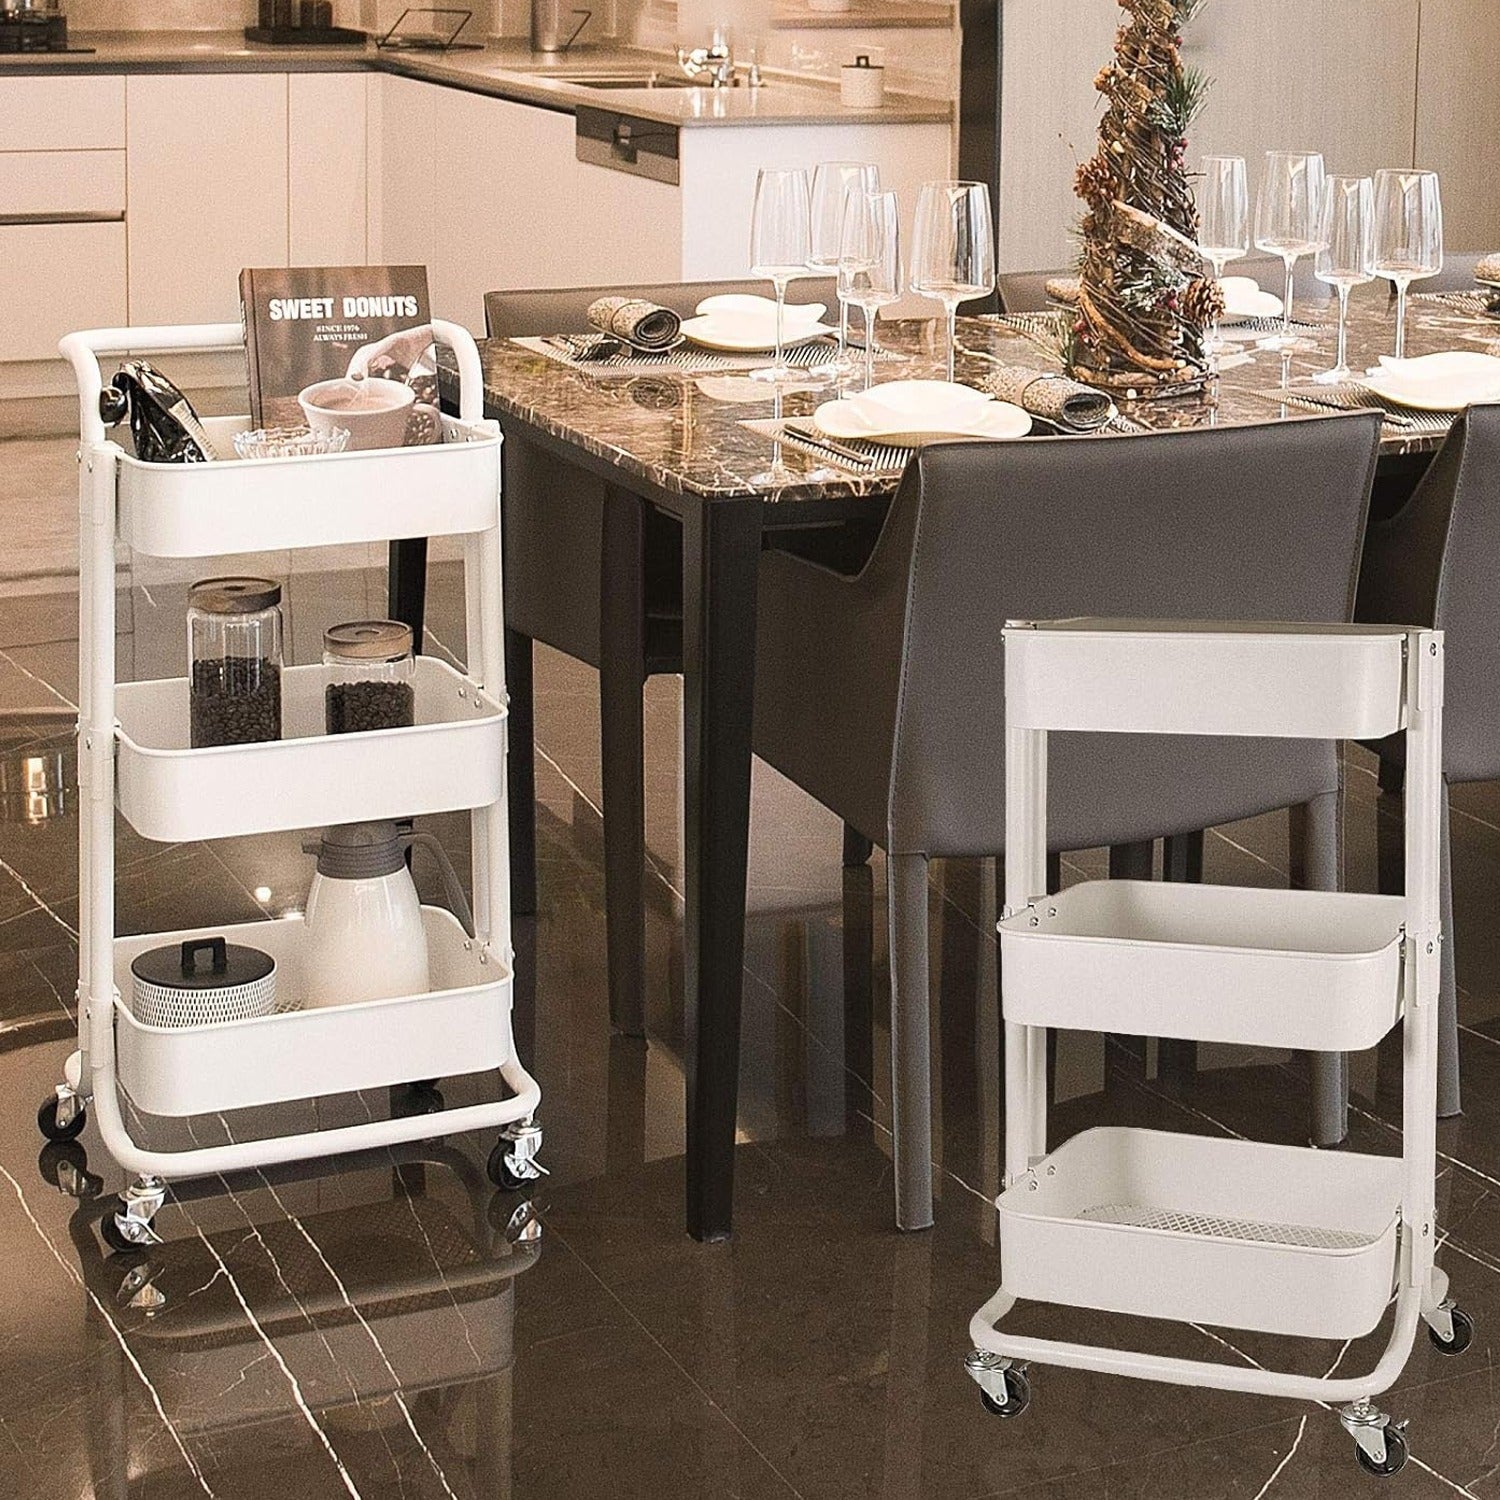 3-Tier Trolley Cart Organizer kept beisde the dining table